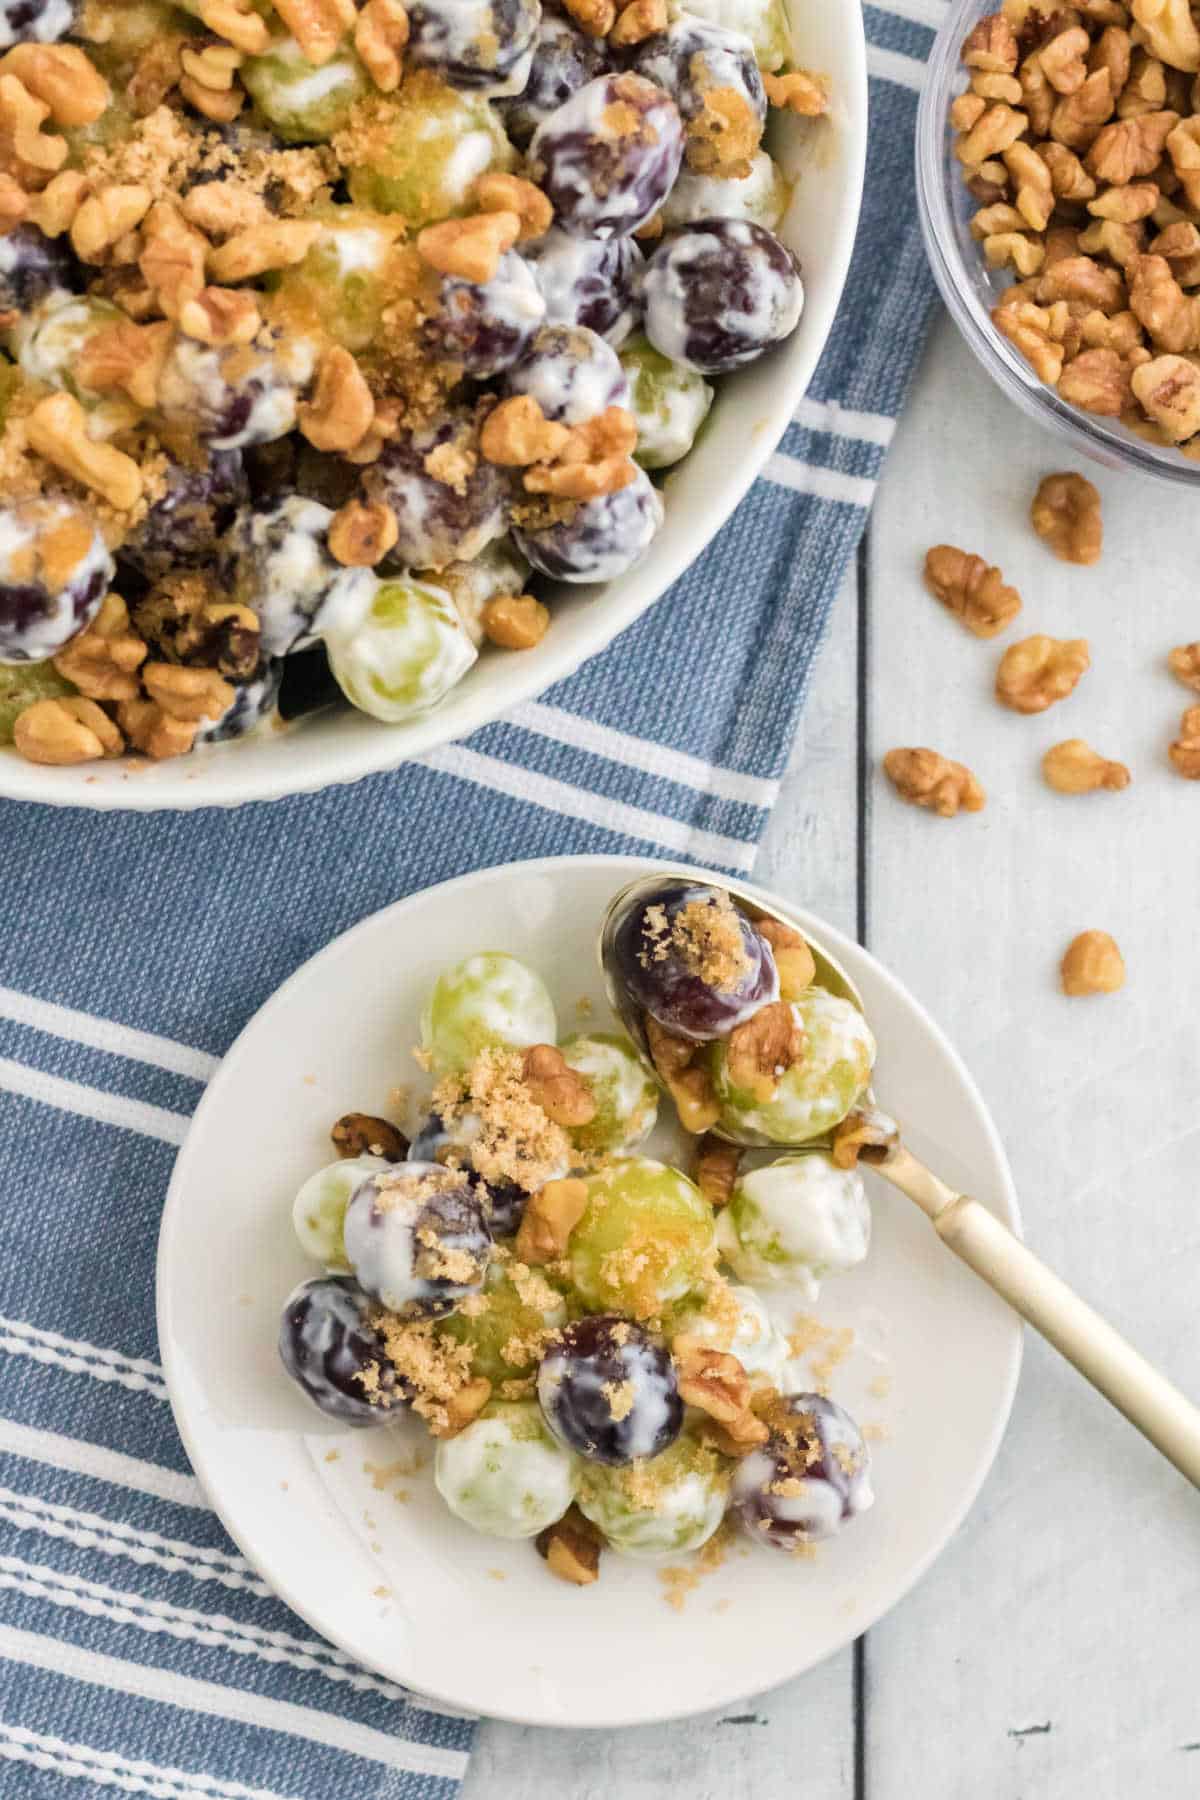 Grape salad on a plate with a spoon.